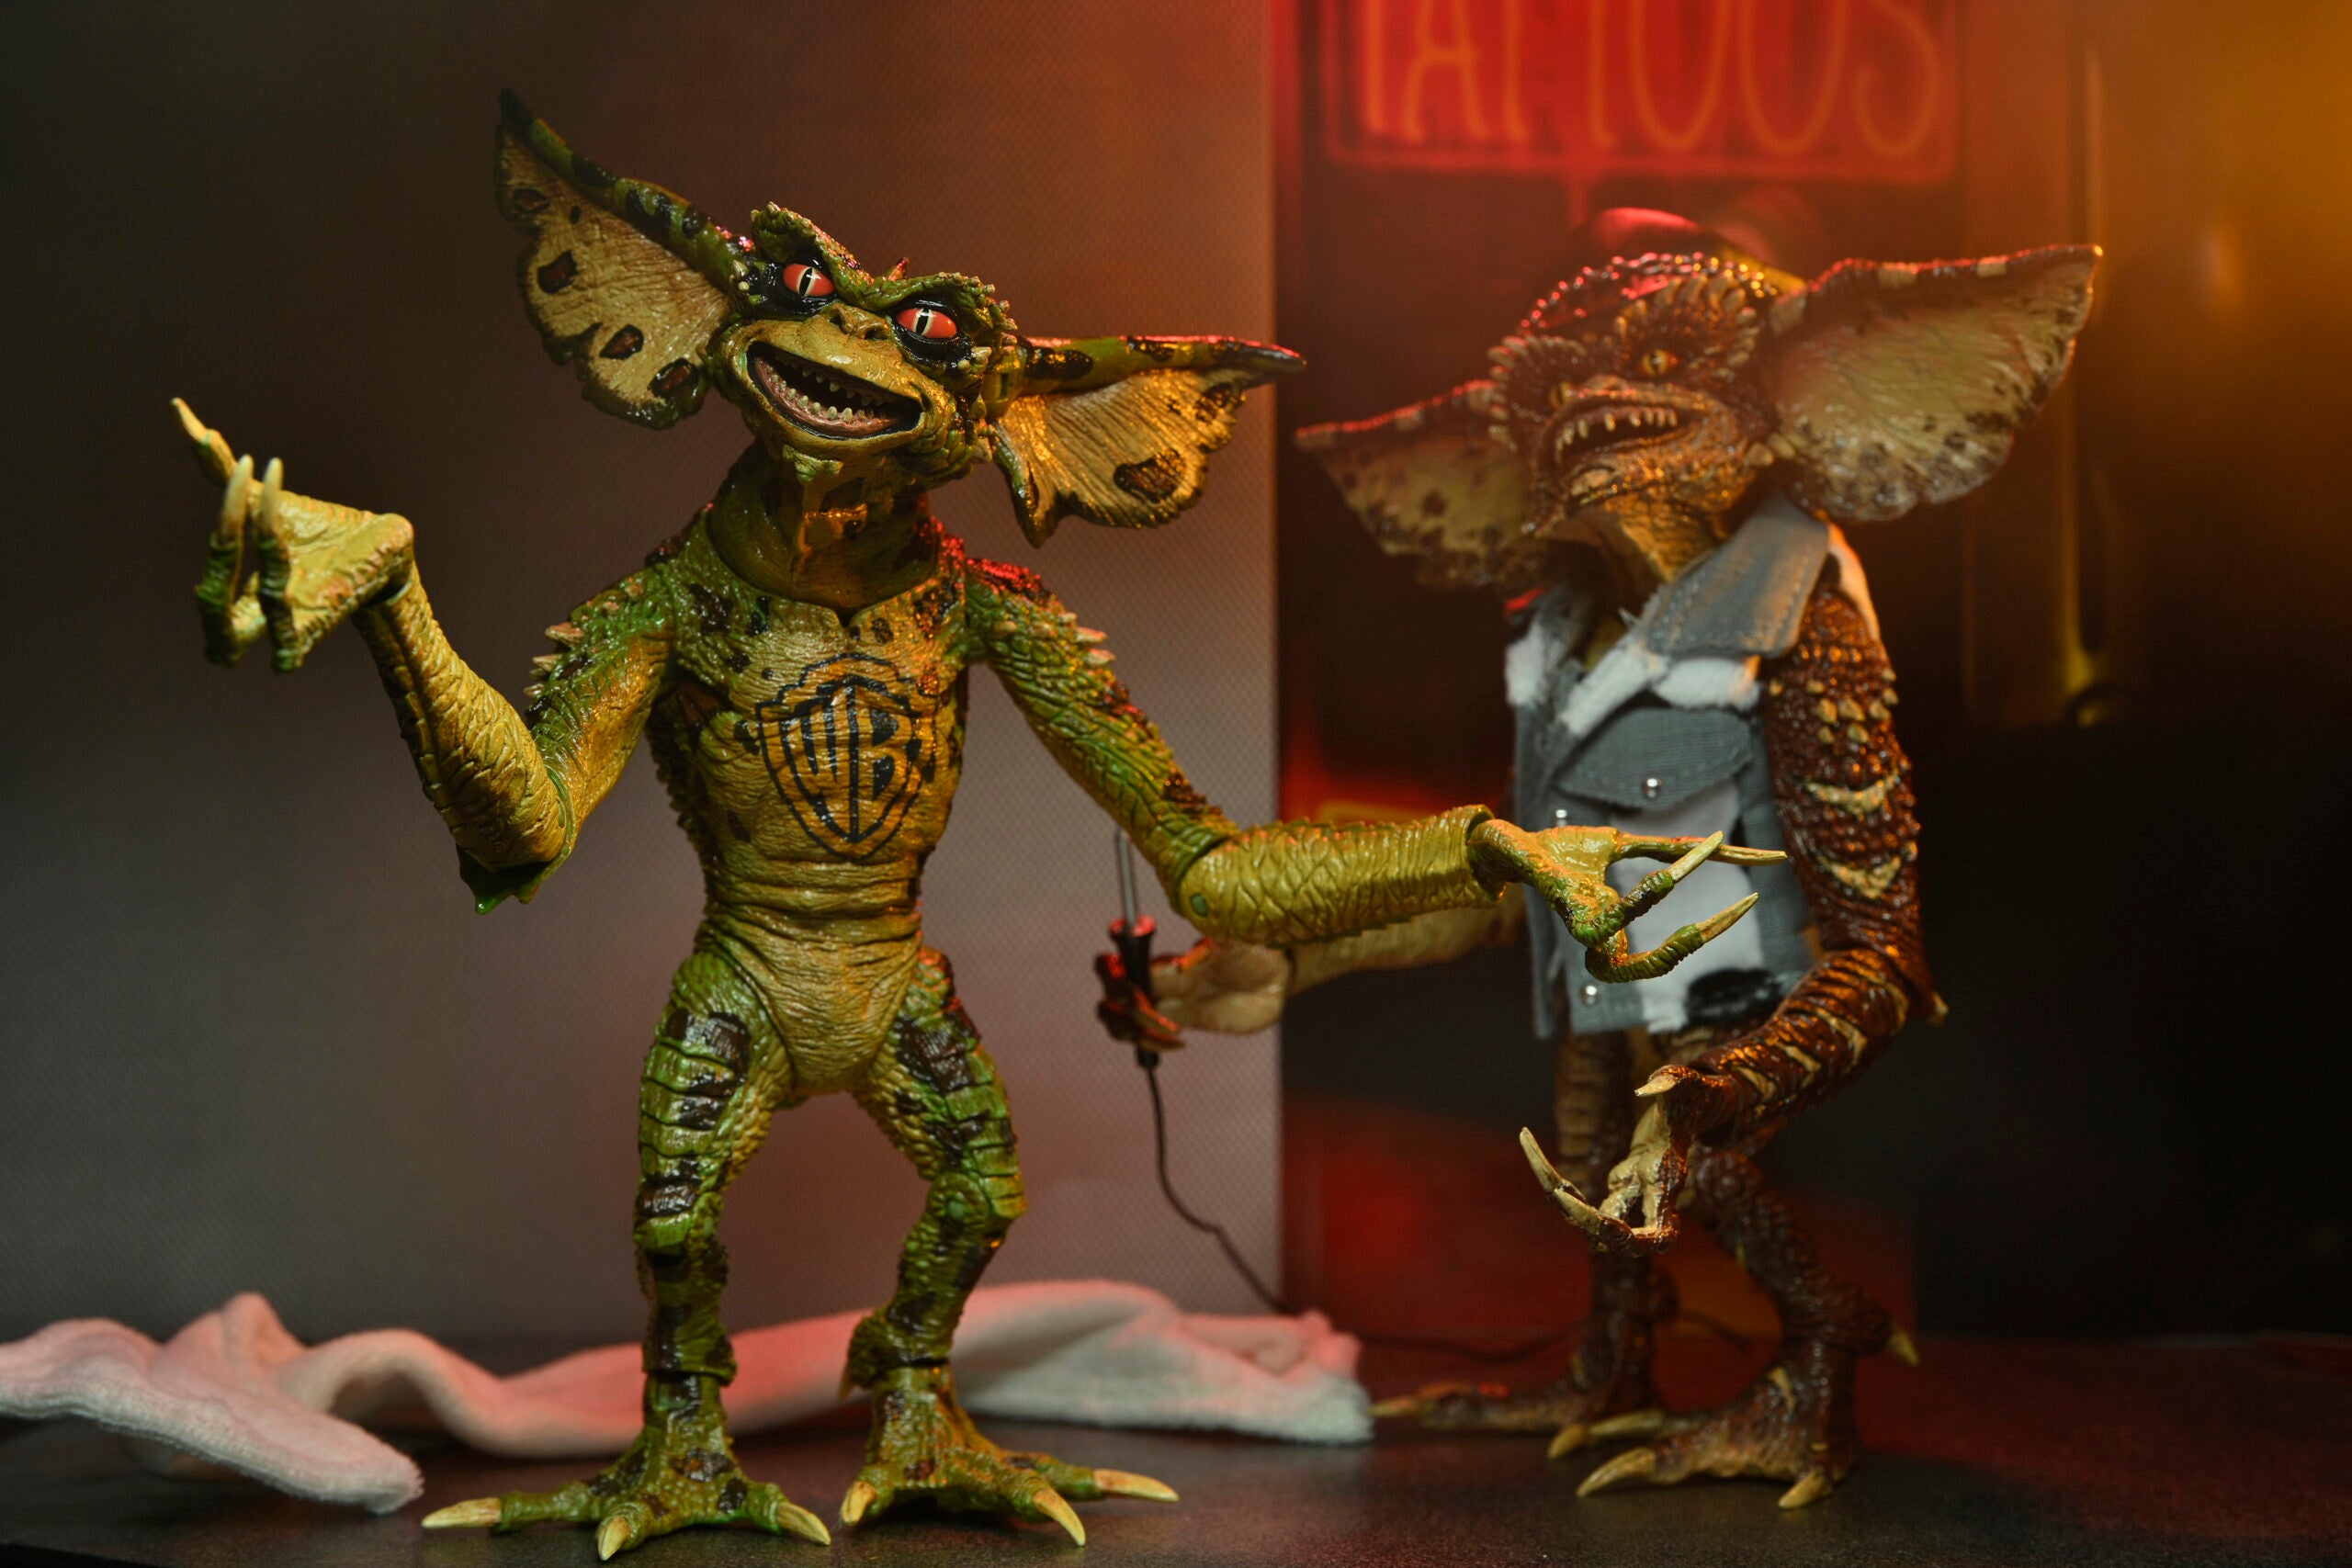 Neca - Gremlins 2: The New Batch - Tattoo Gremlins Two-Pack - Marvelous Toys